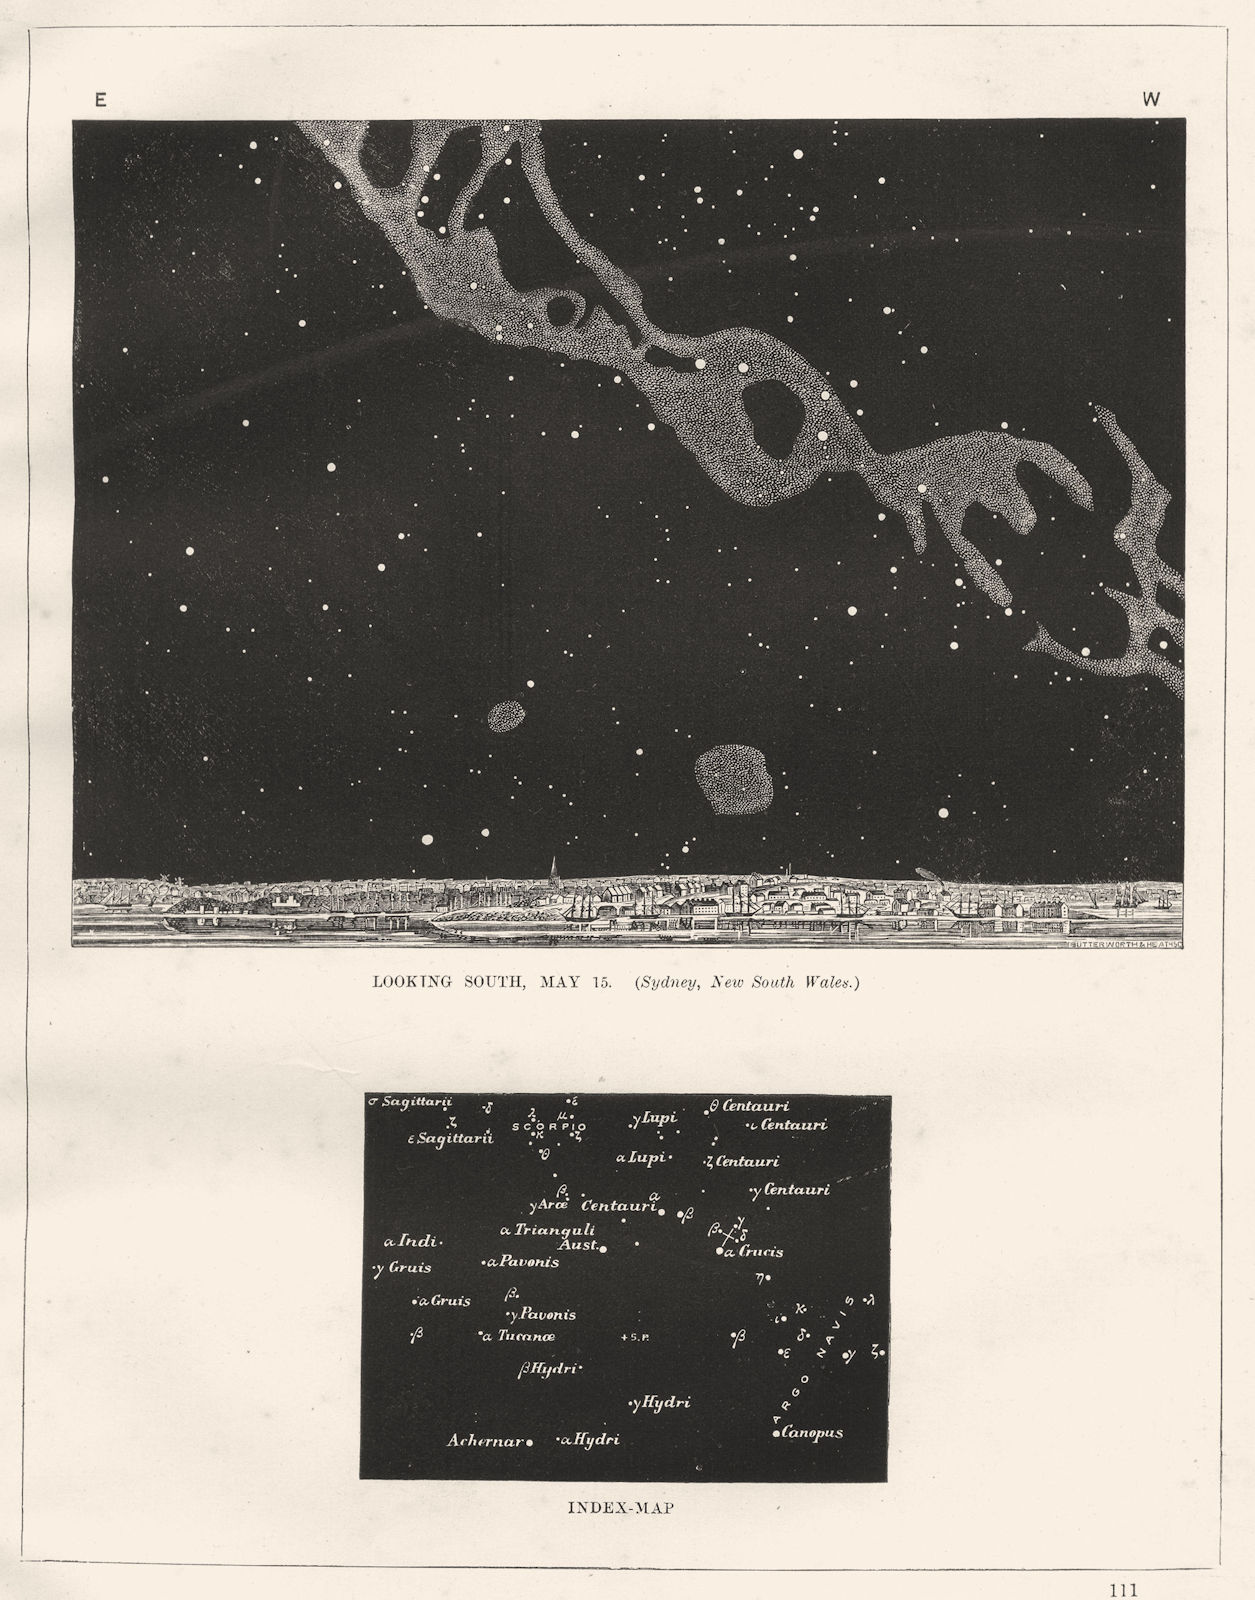 SYDNEY. Midnight sky of Southern Hemisphere. Looking south, May 15 (NSW)  1869